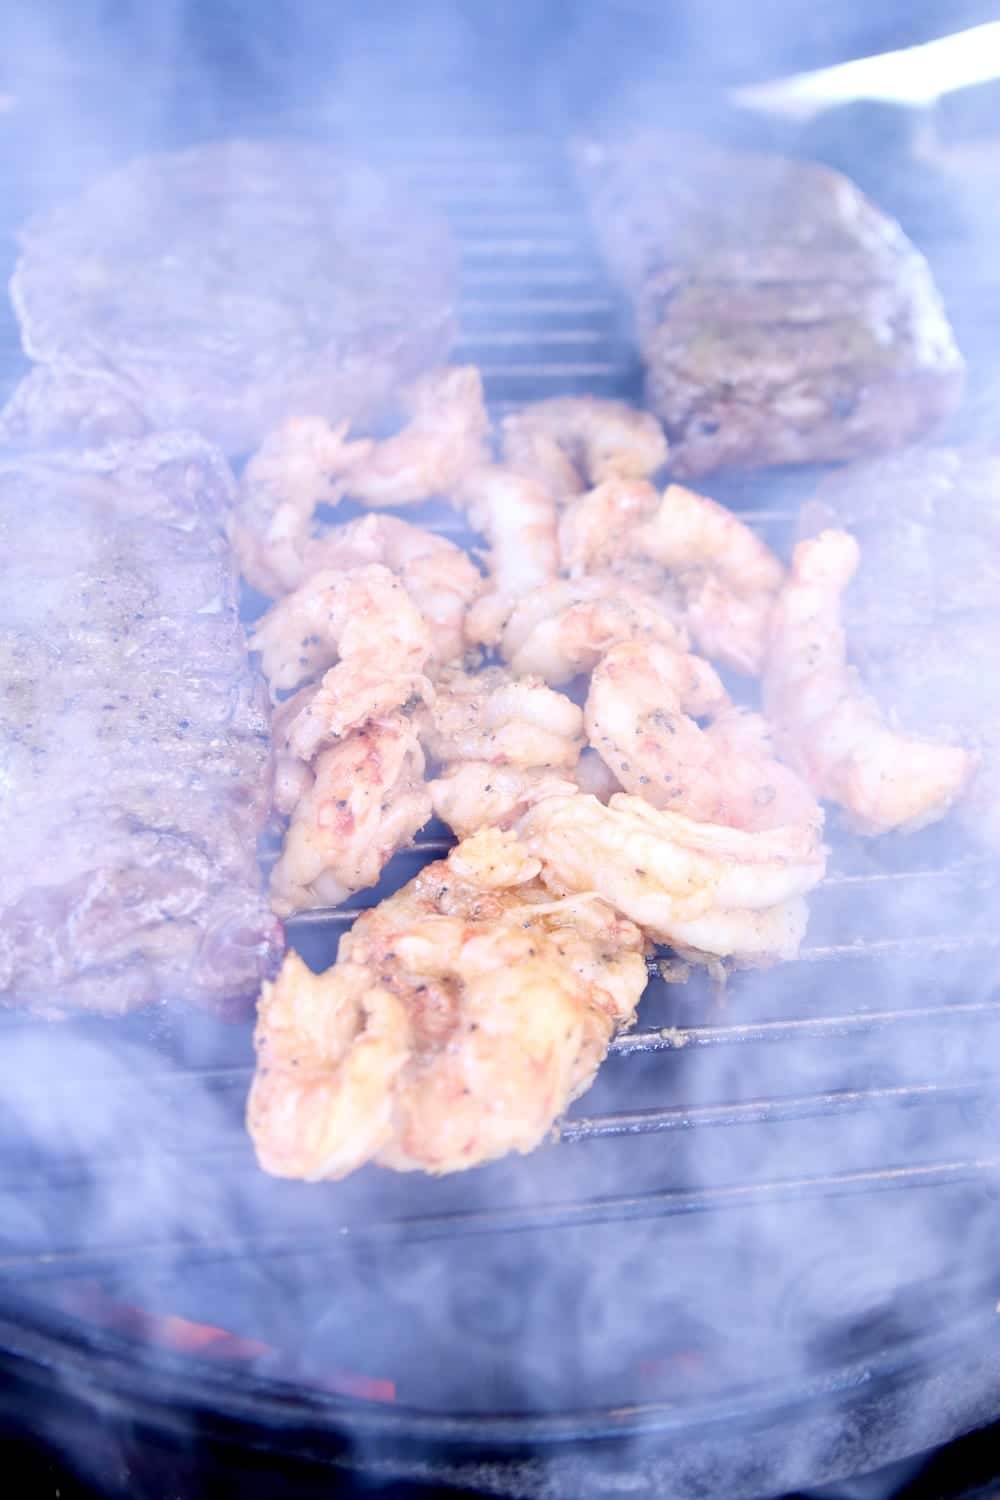 grilling steaks and shrimp - smoky grill